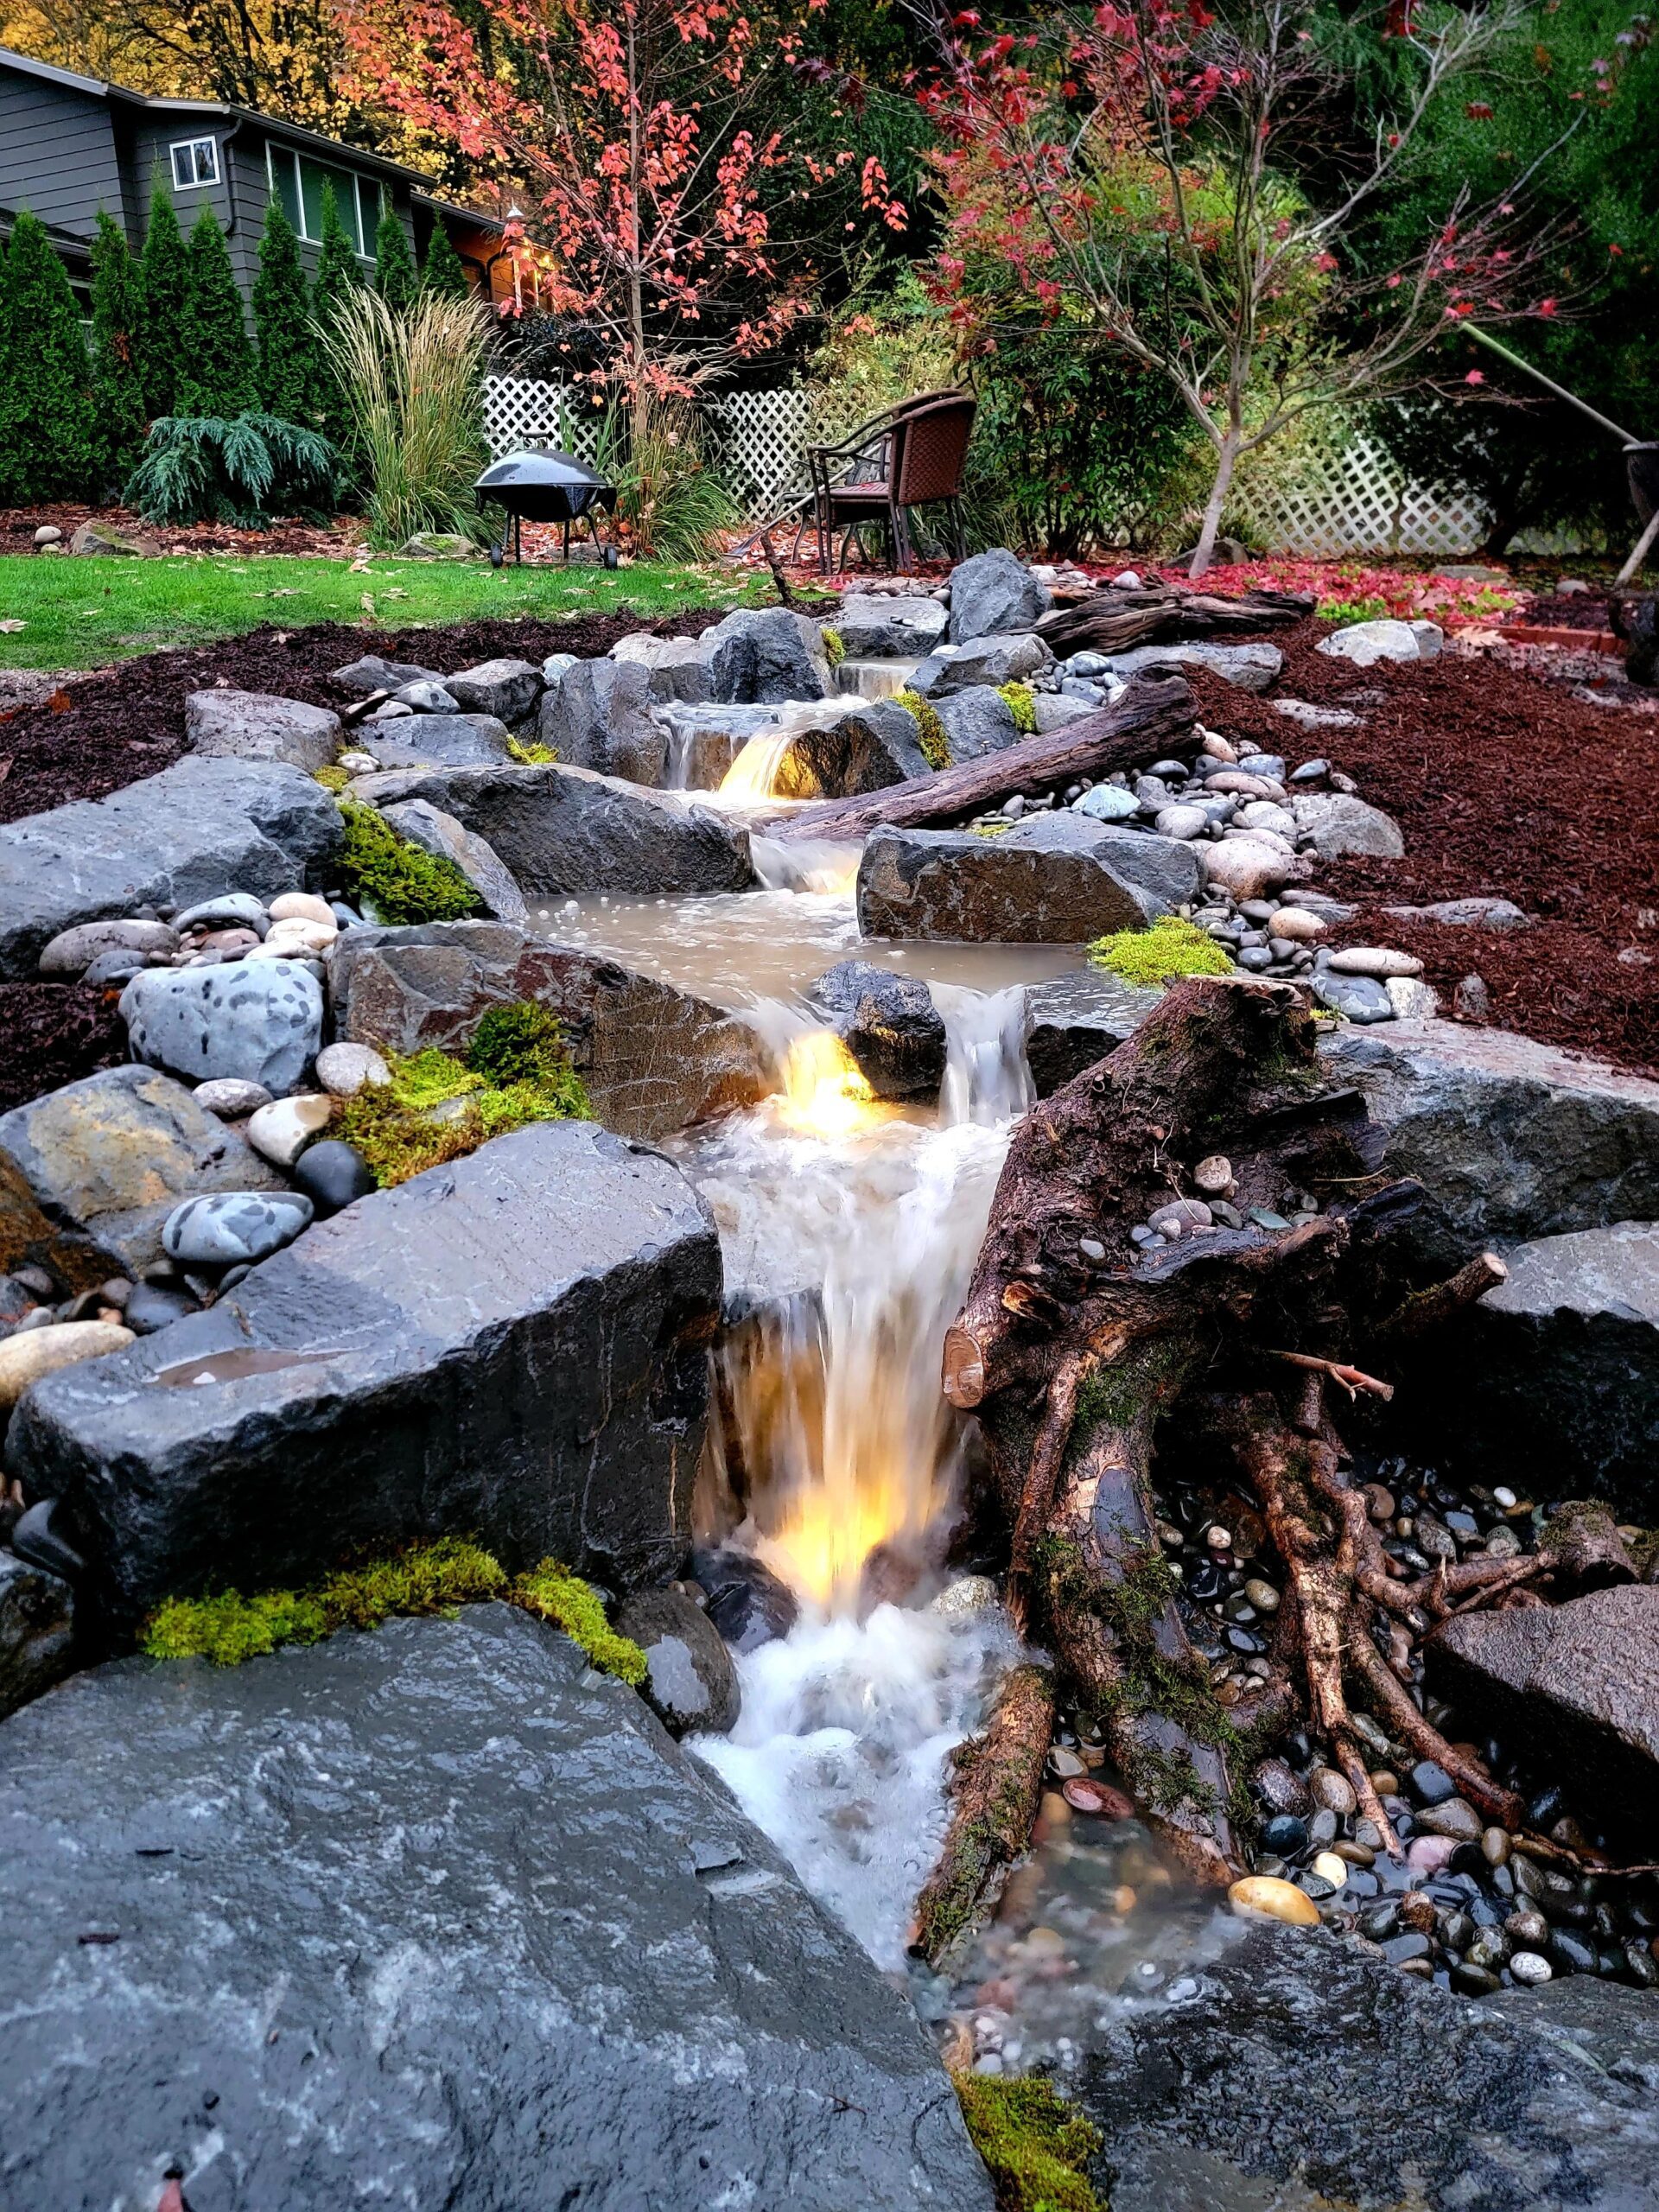 https://www.seedsofnaturewatergardens.com/wp-content/uploads/2022/02/Tranquility-Falls-Deluxe-min-scaled.jpg